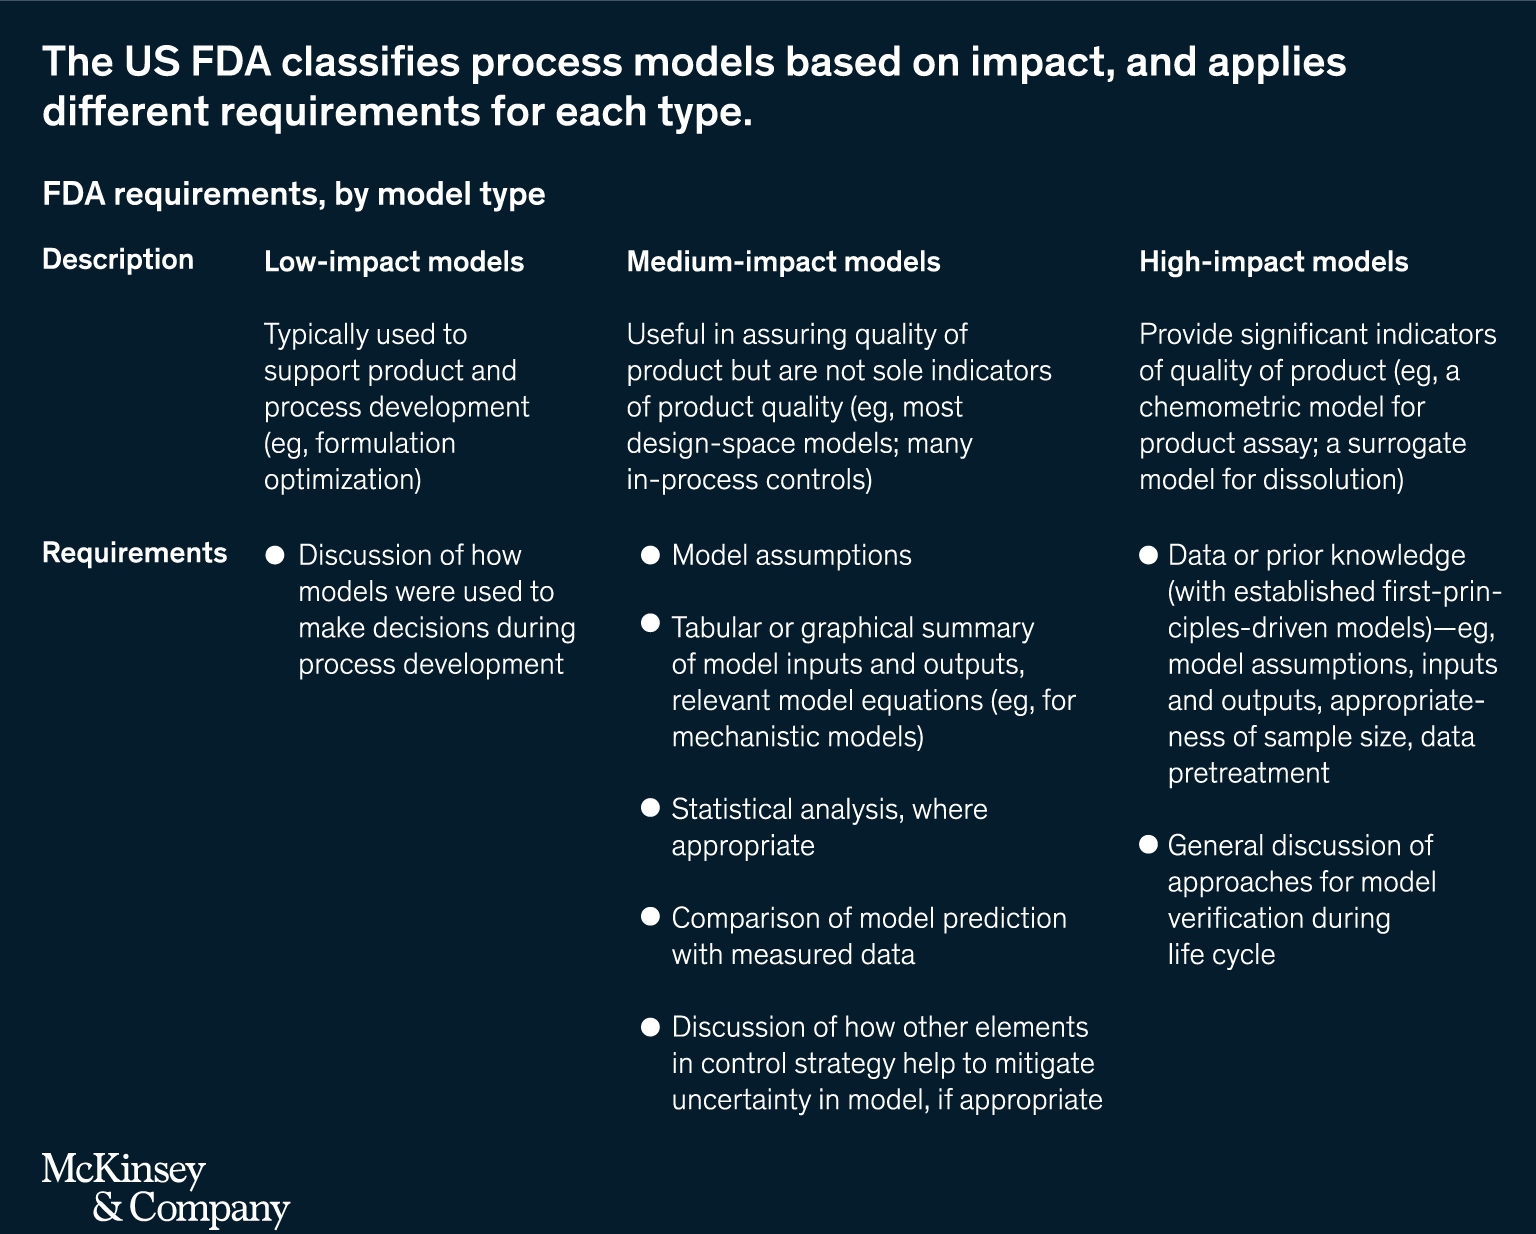 The US FDA classifies process models based on impact, and applies different requirements for each type